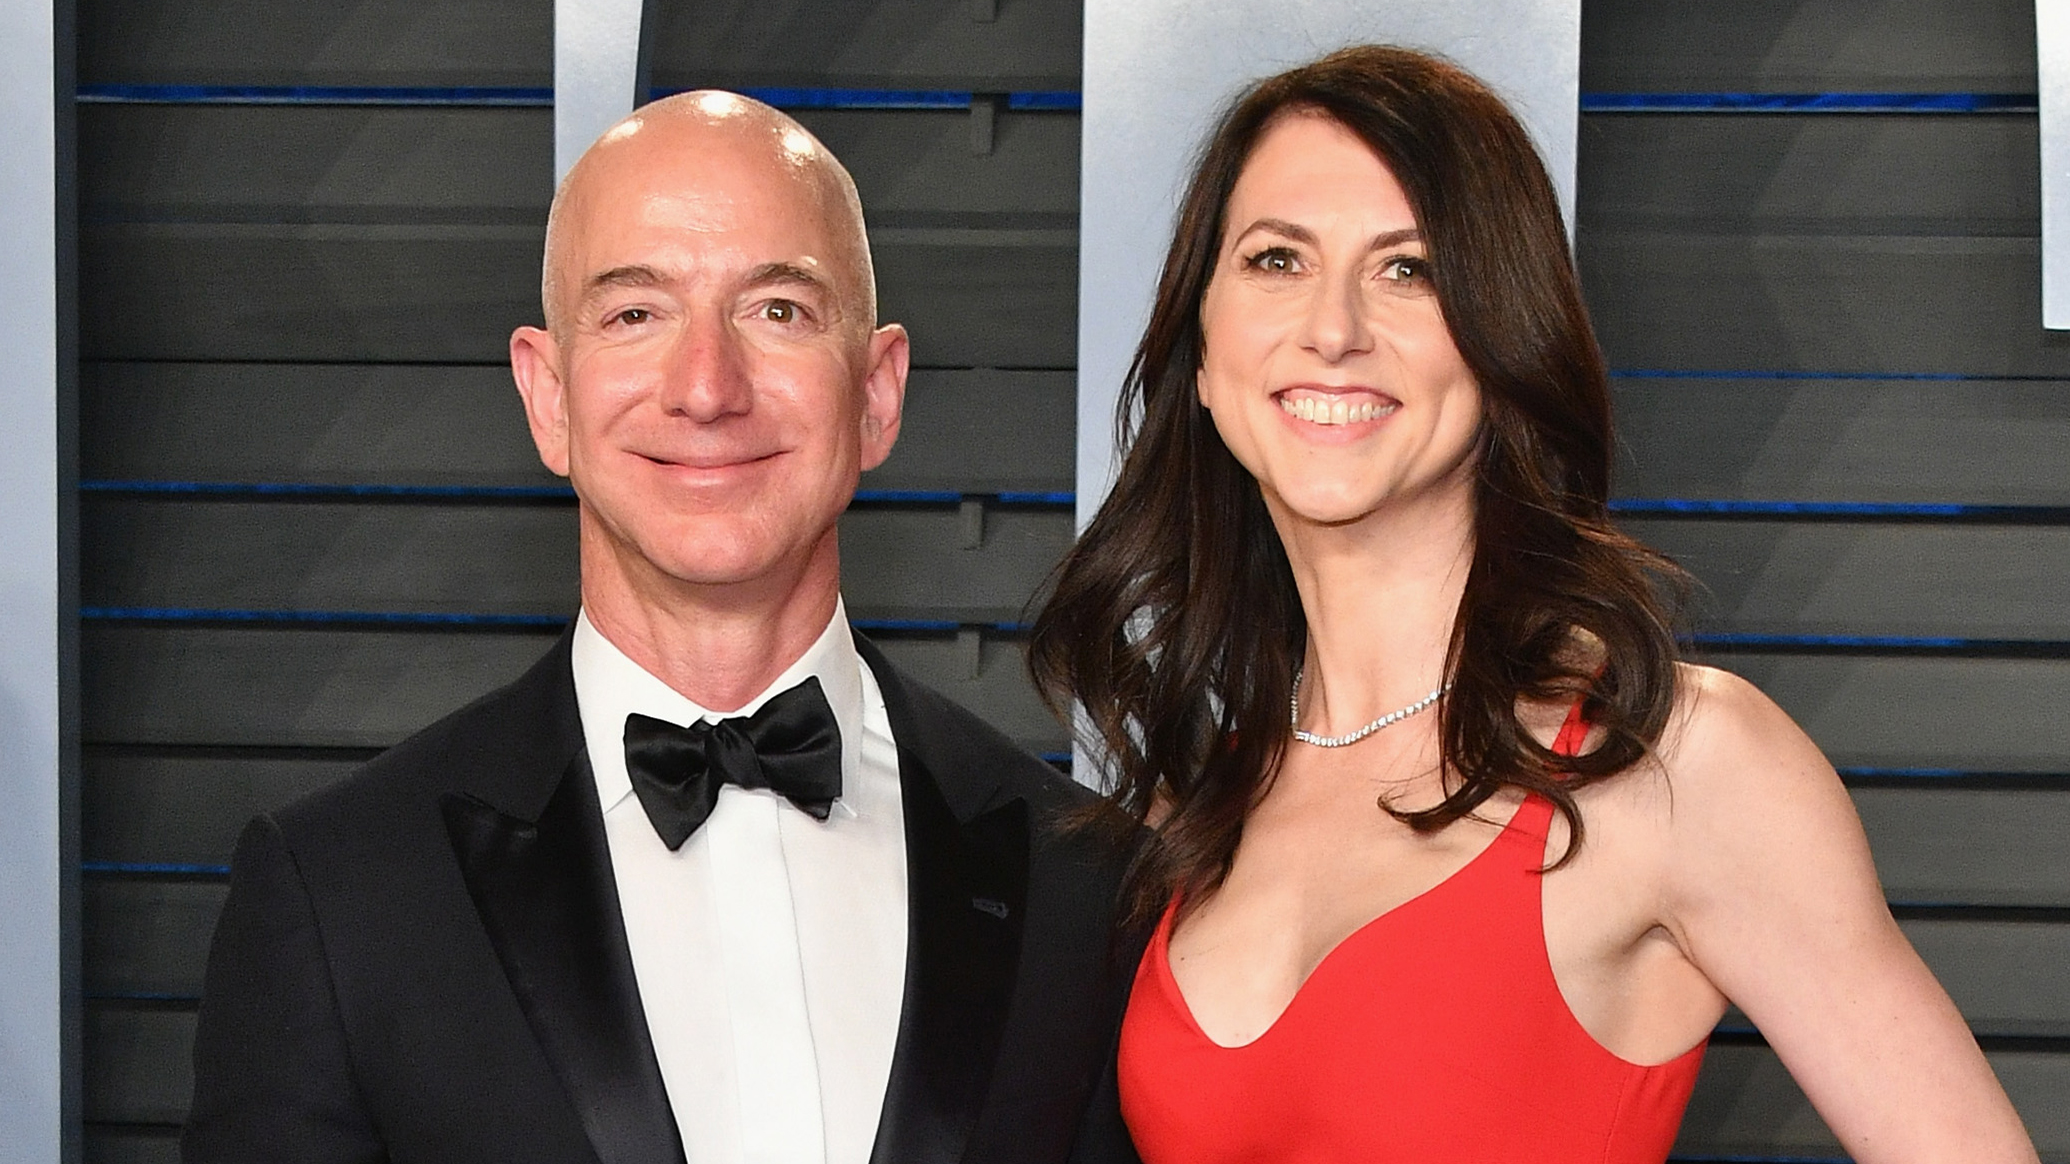 Amazon Ceo Jeff Bezos Divorcing Wife Mackenzie After 25 Years Of Marriage 0203